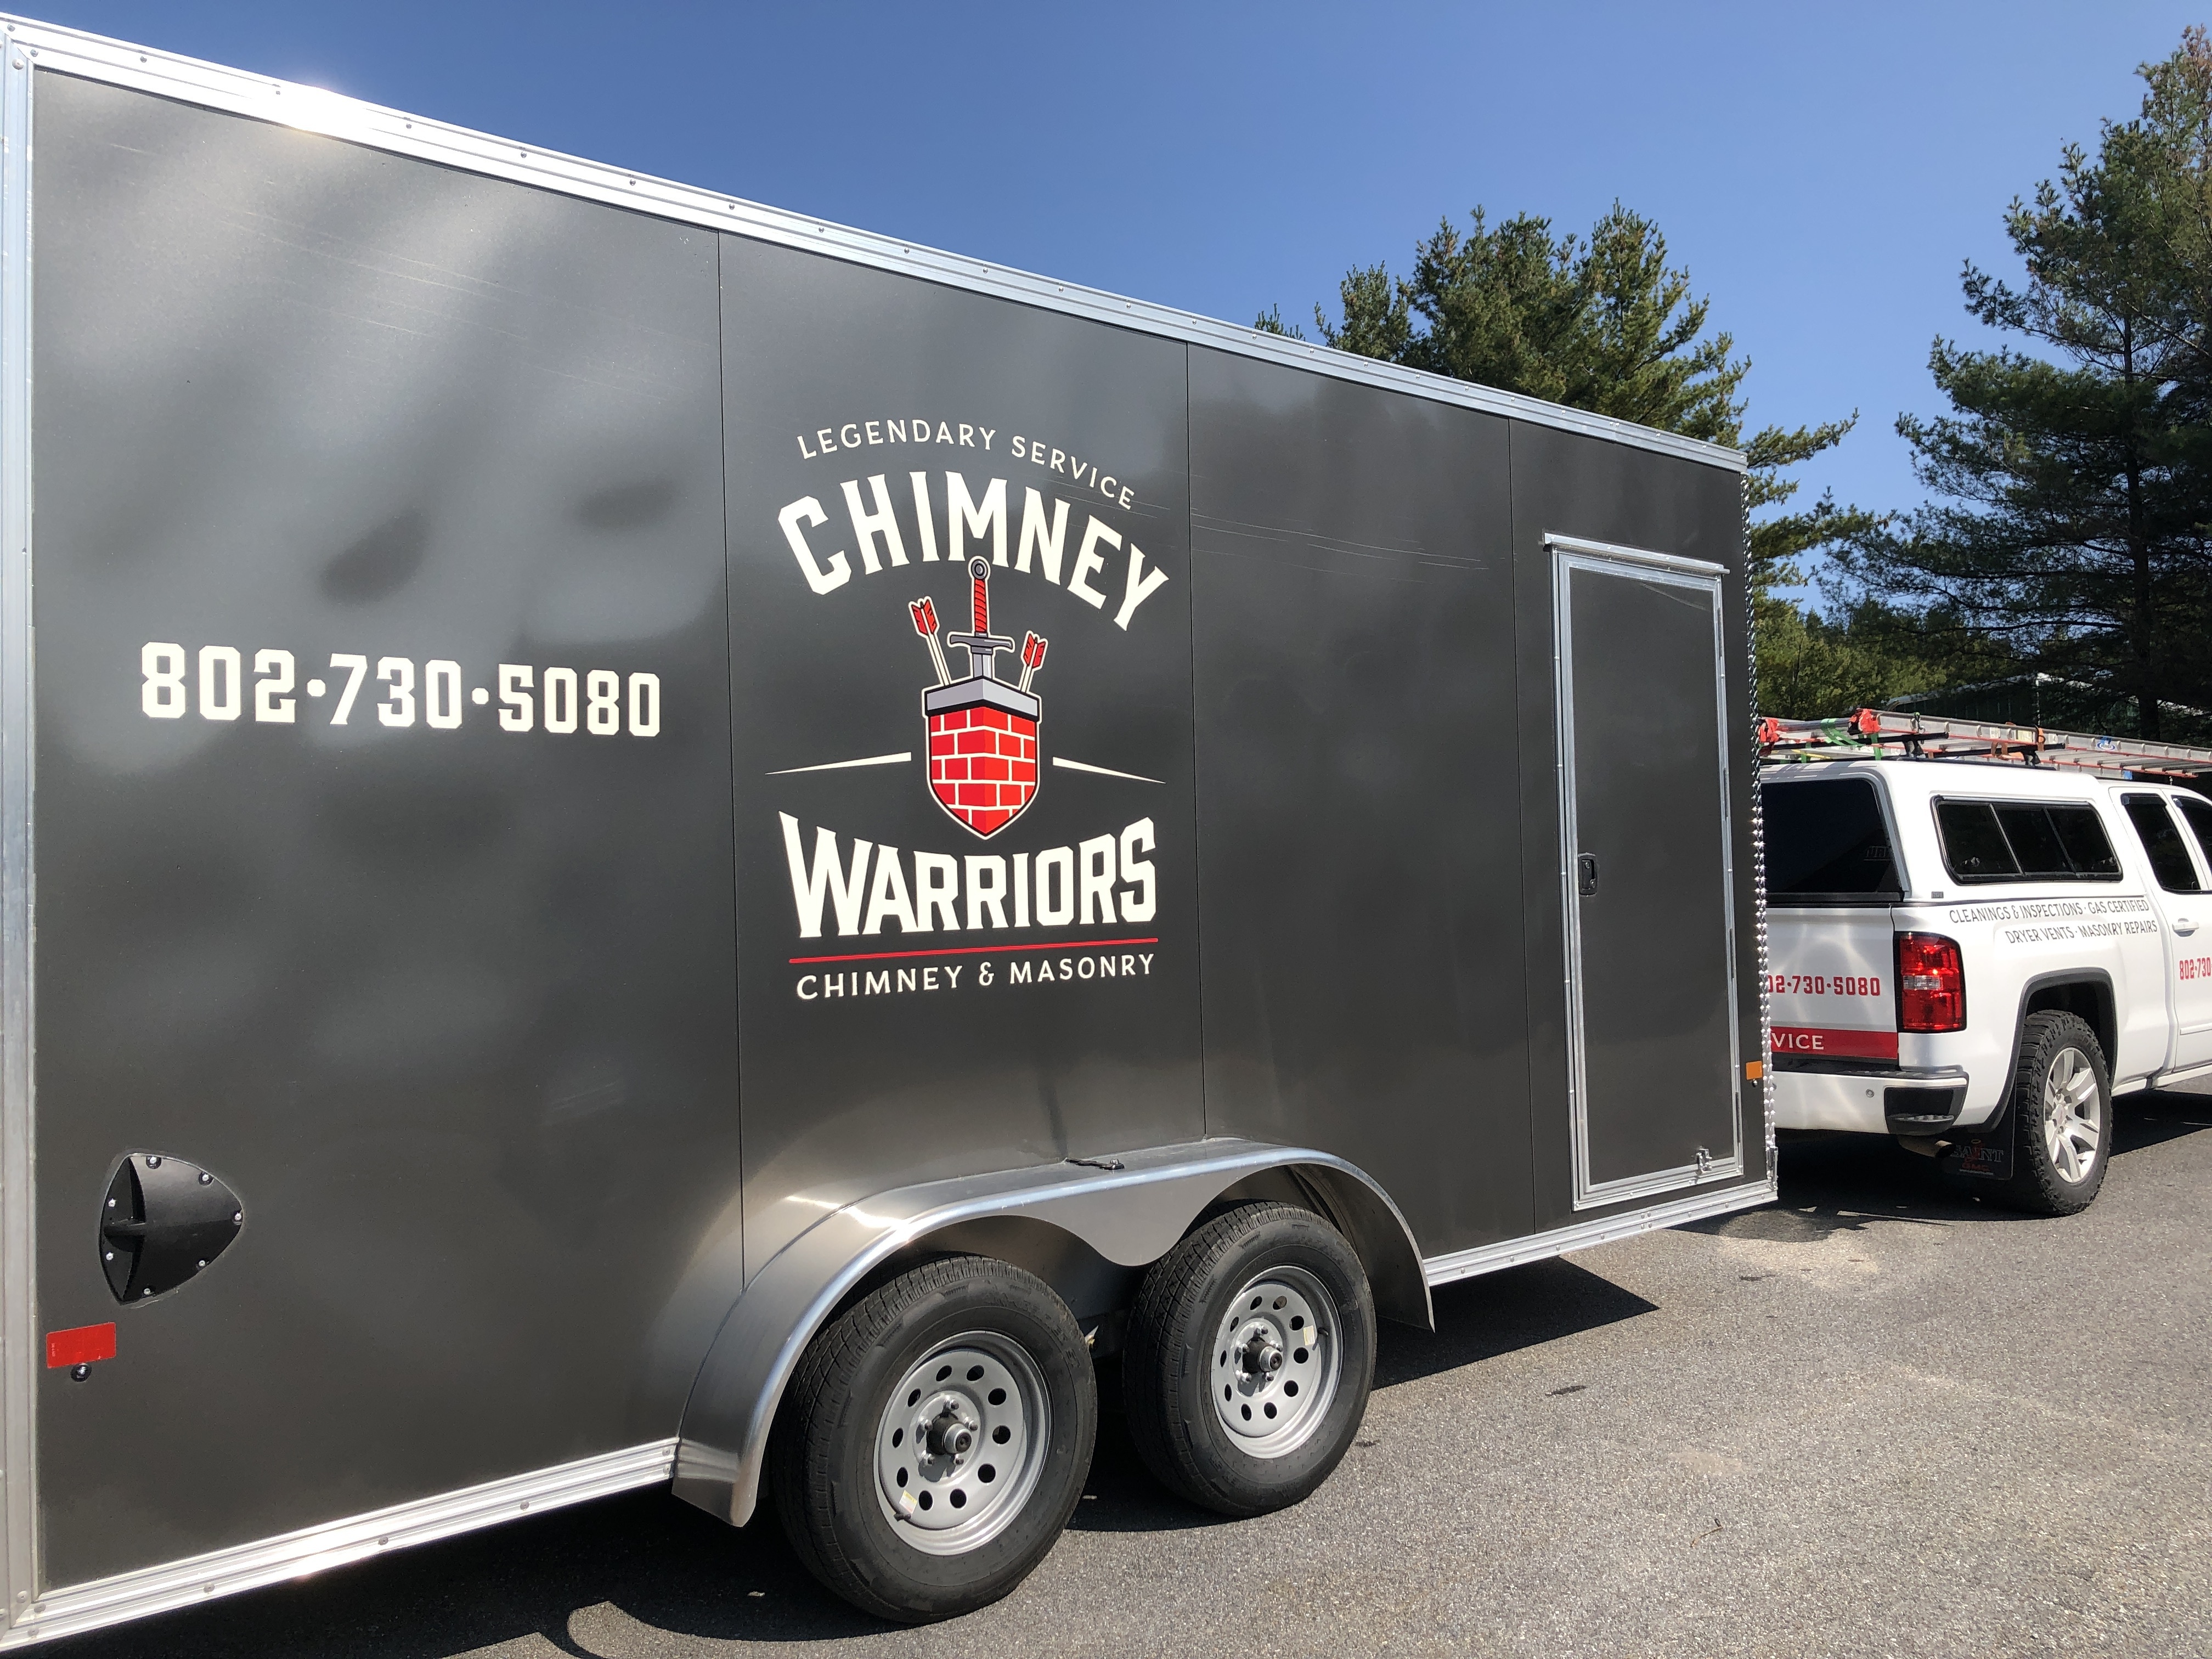 Chimney Warriors branding on vehicle with vehicle graphics